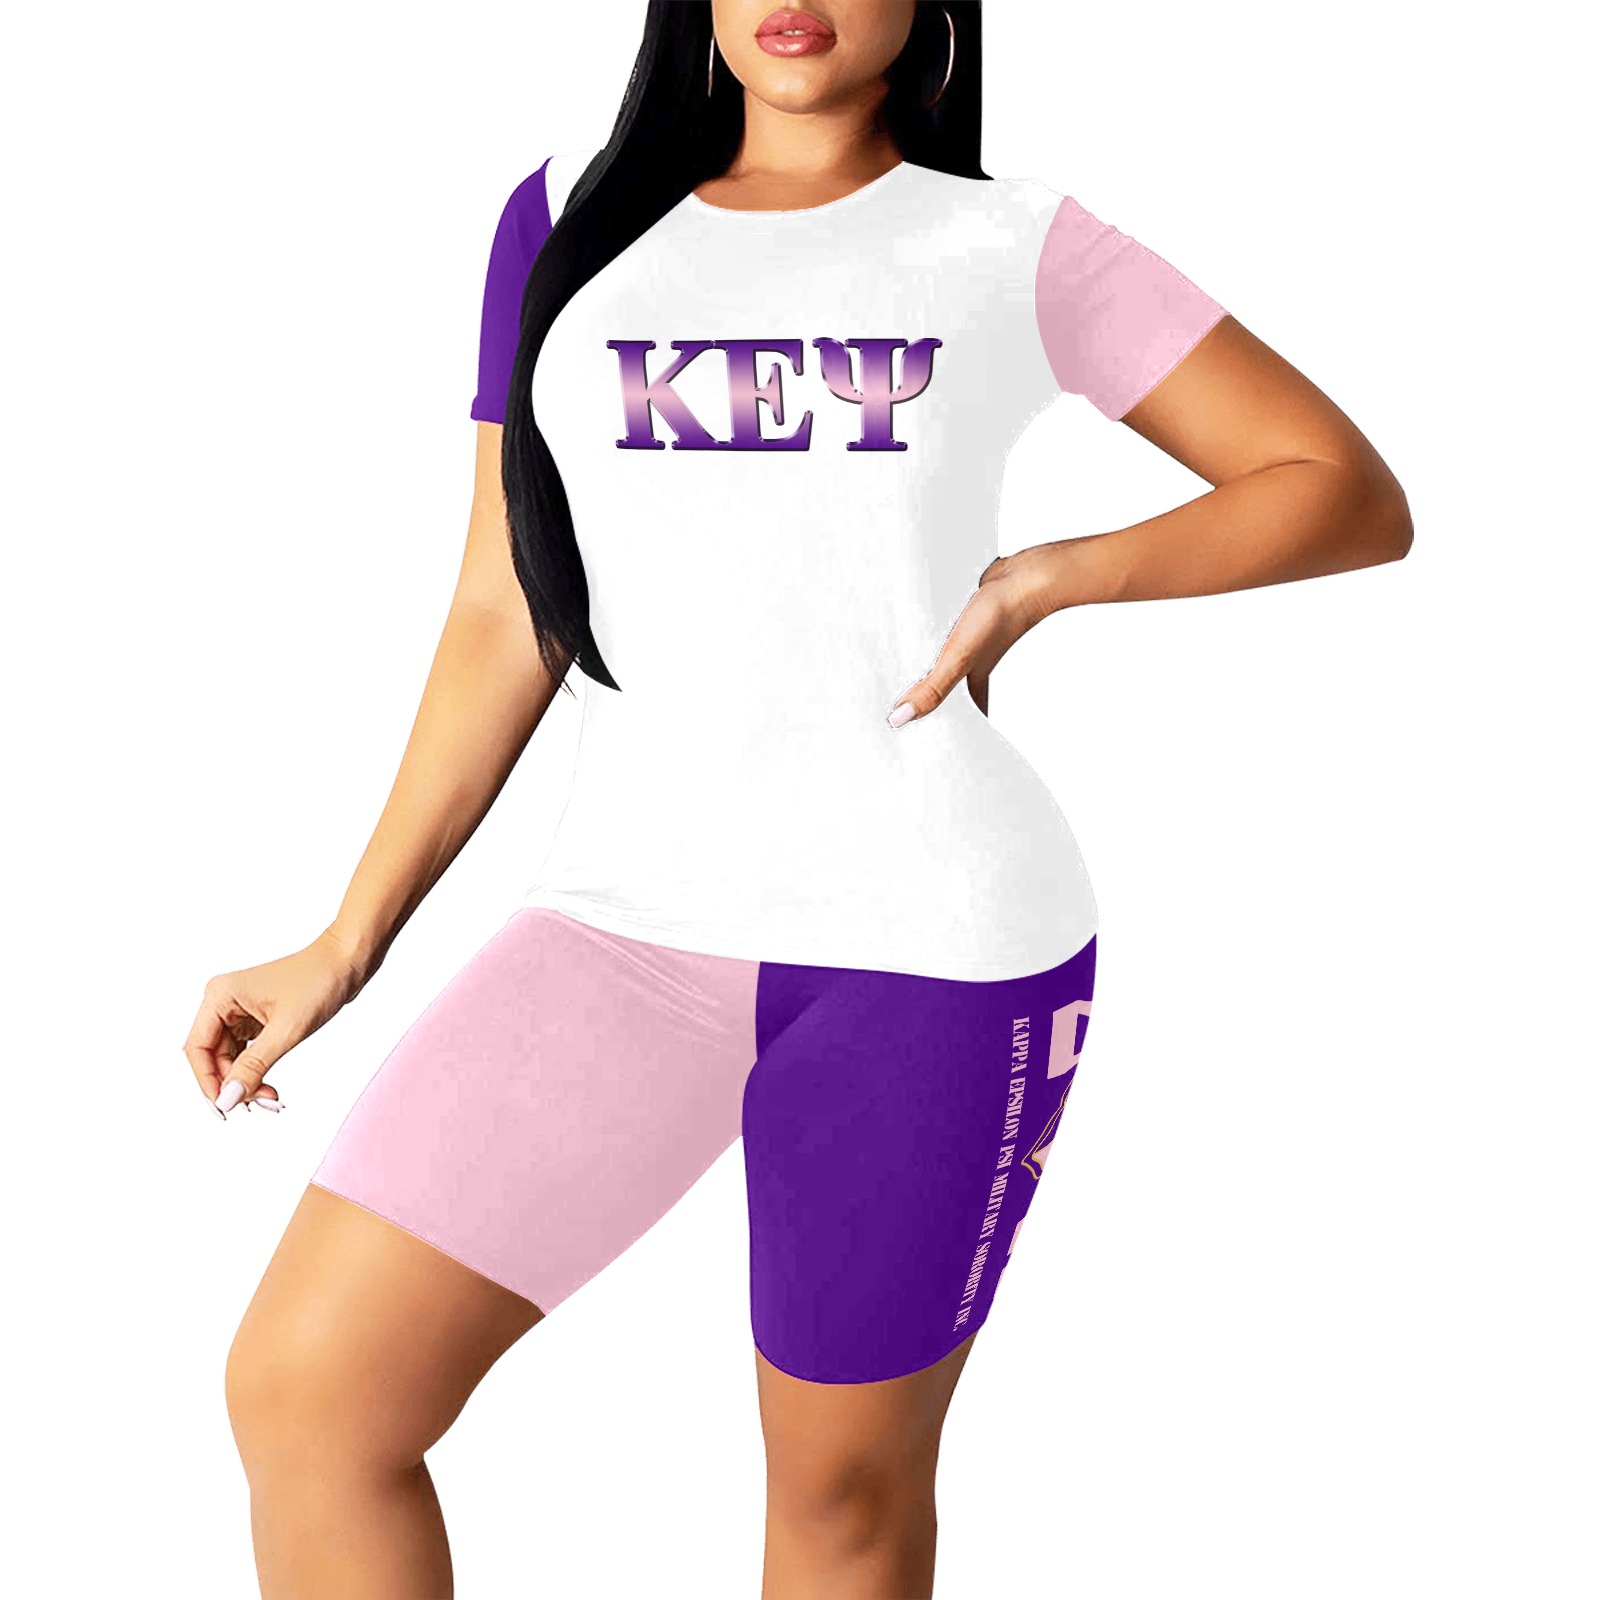 Woman in white and purple sportswear outfit.